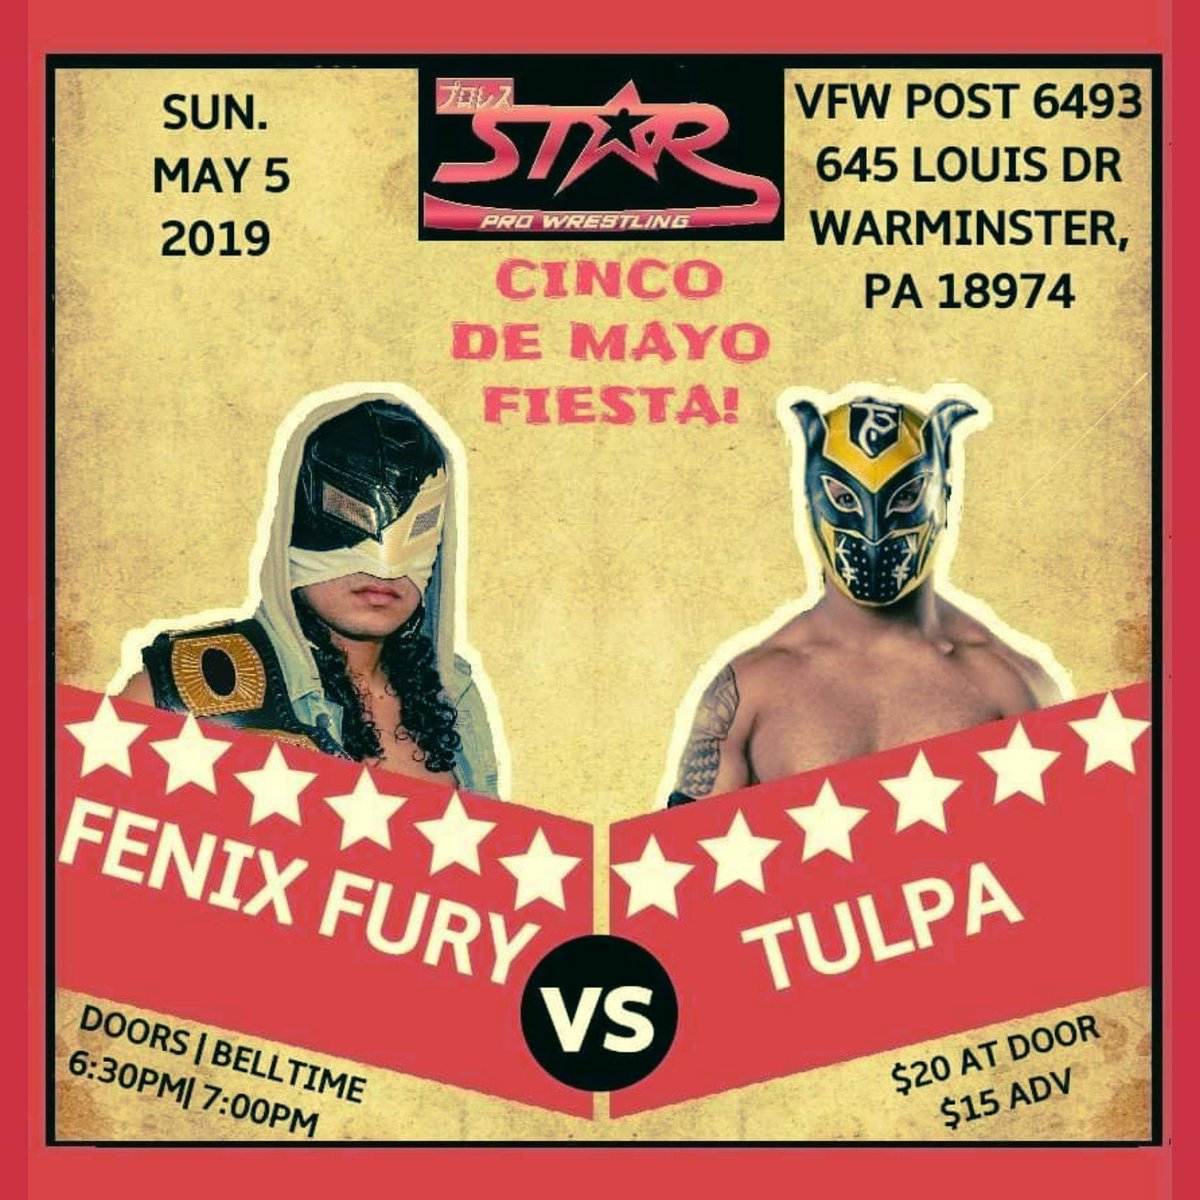 May 5th @starprollc #justice will be coming full force as I take on @fenixfuryofficial in #warminster #pennsylvania 
#maskedvigilante #TulpaTime #TulpaIsAlive #bethere #Lucha #cincodemayo #hero #tNtVigilante